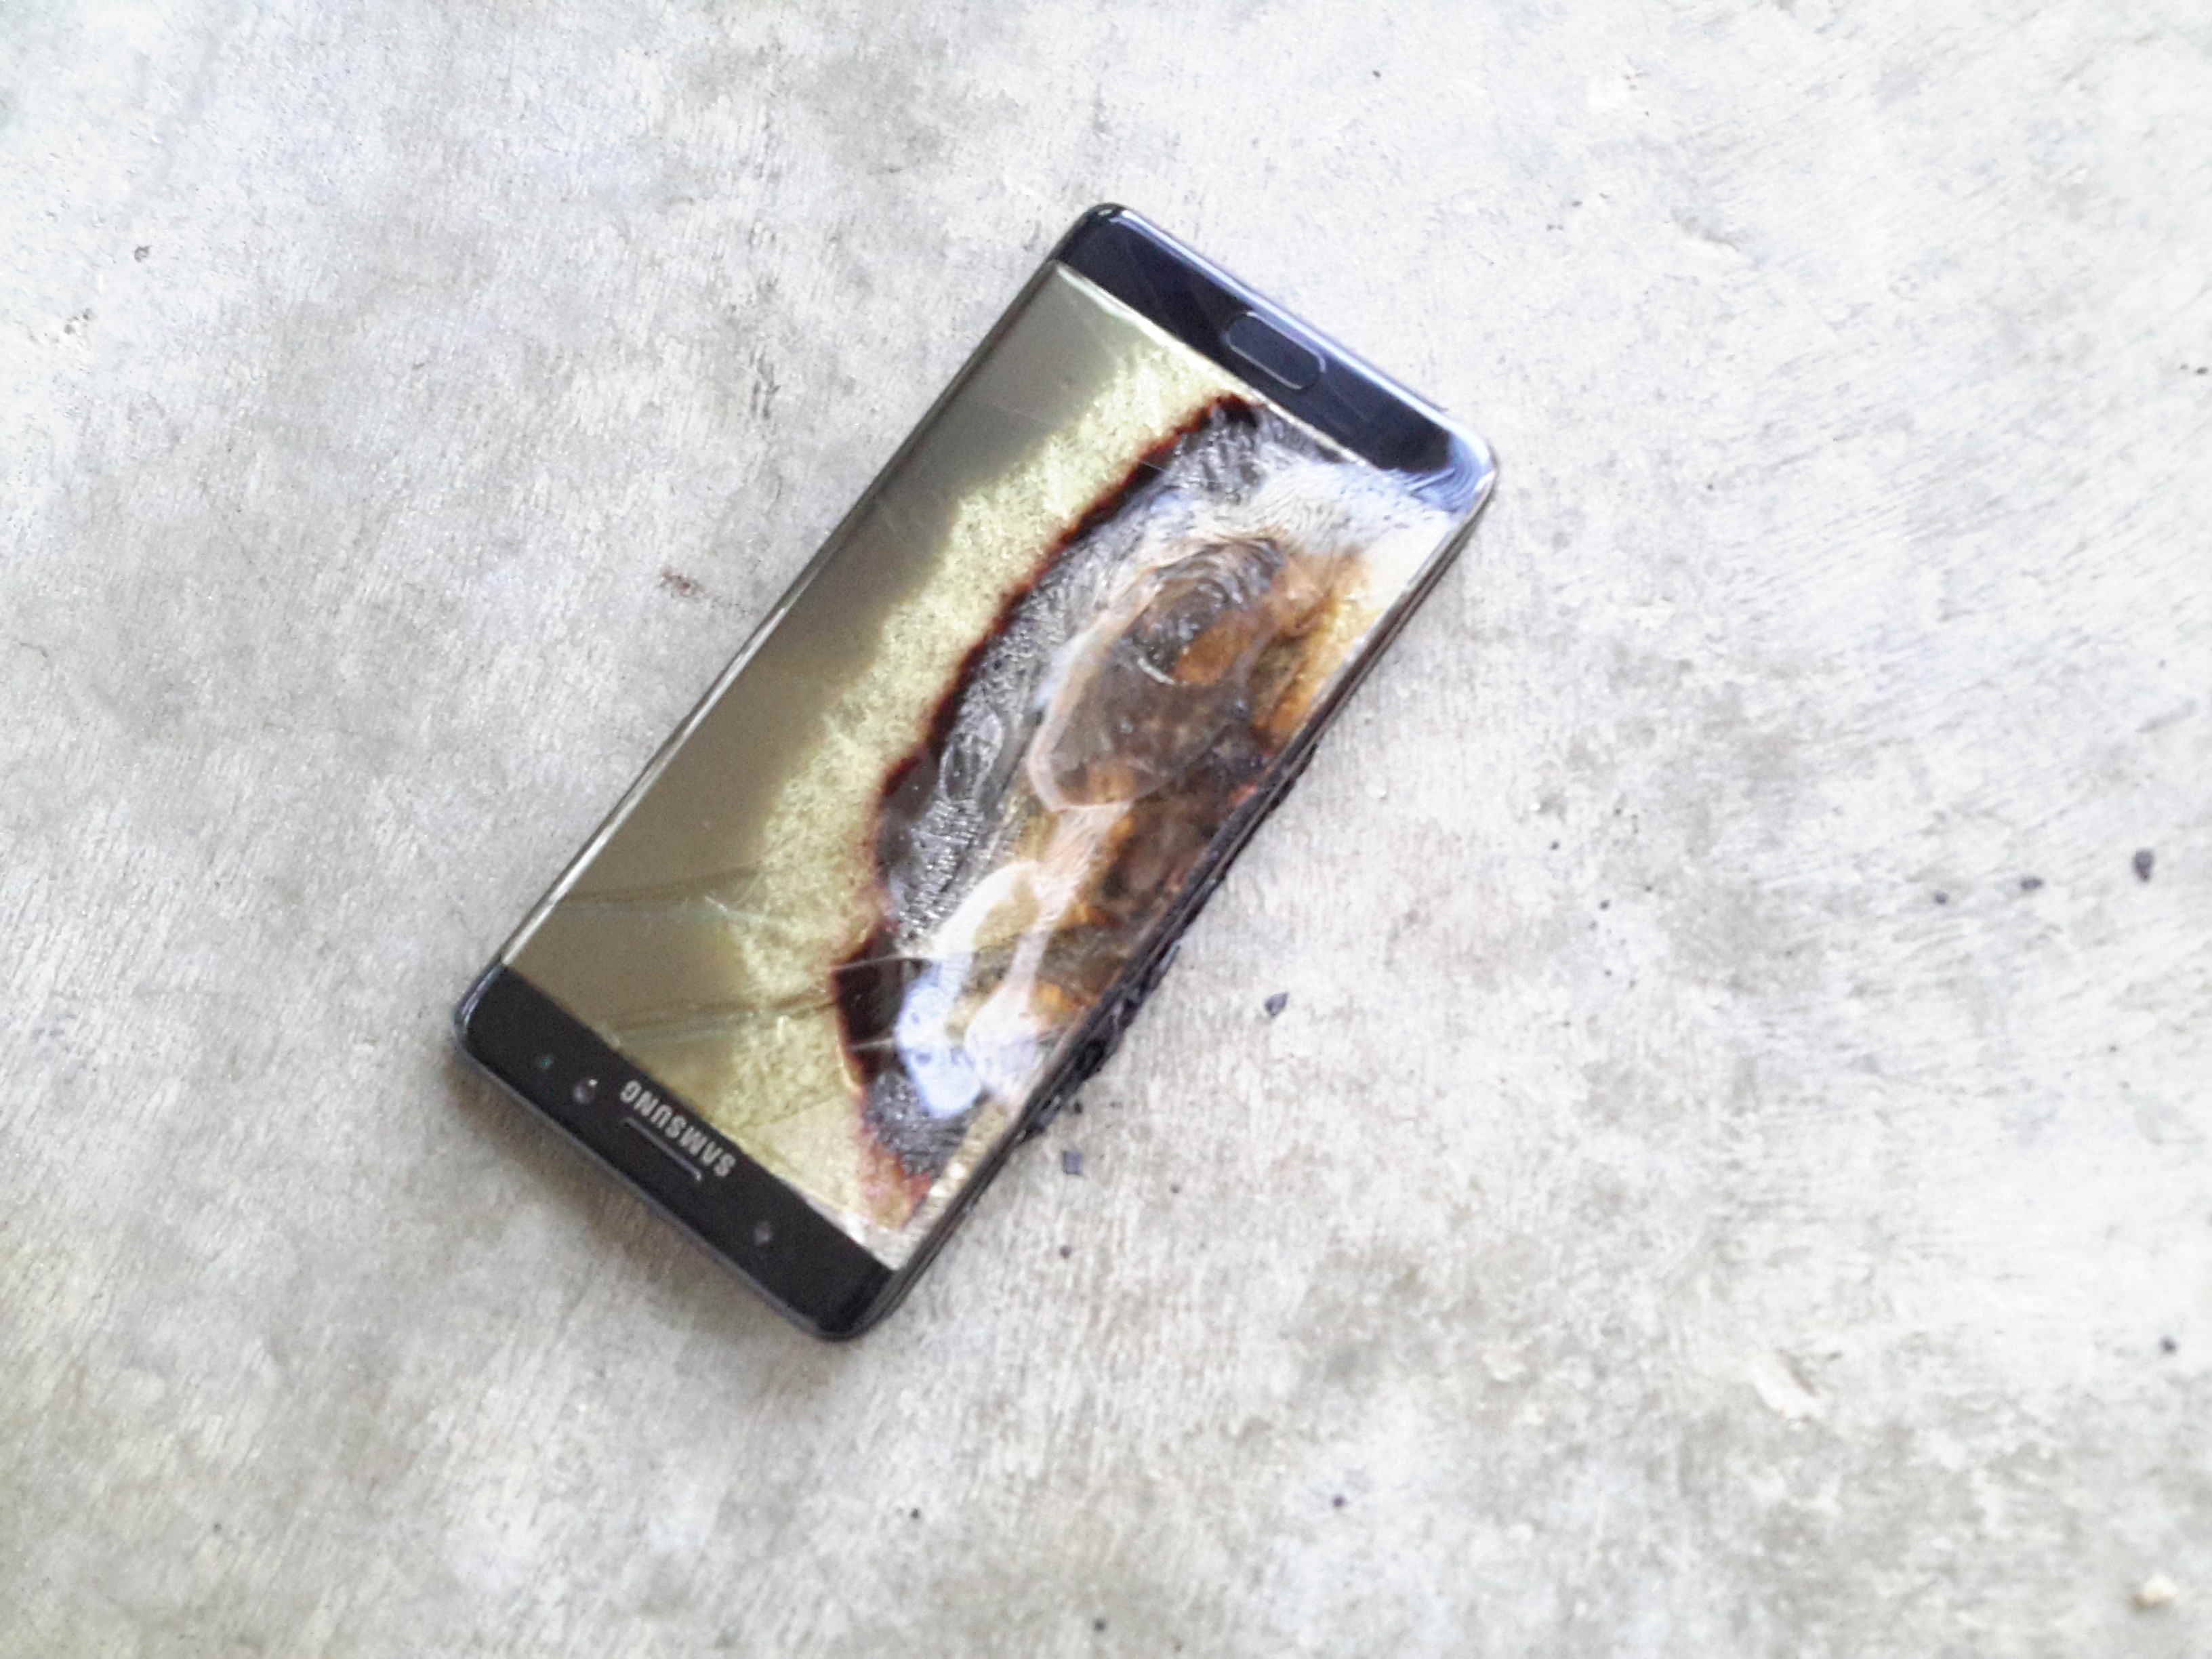 Another-Samsung-Galaxy-Note-7-battery-catches-fire (1)